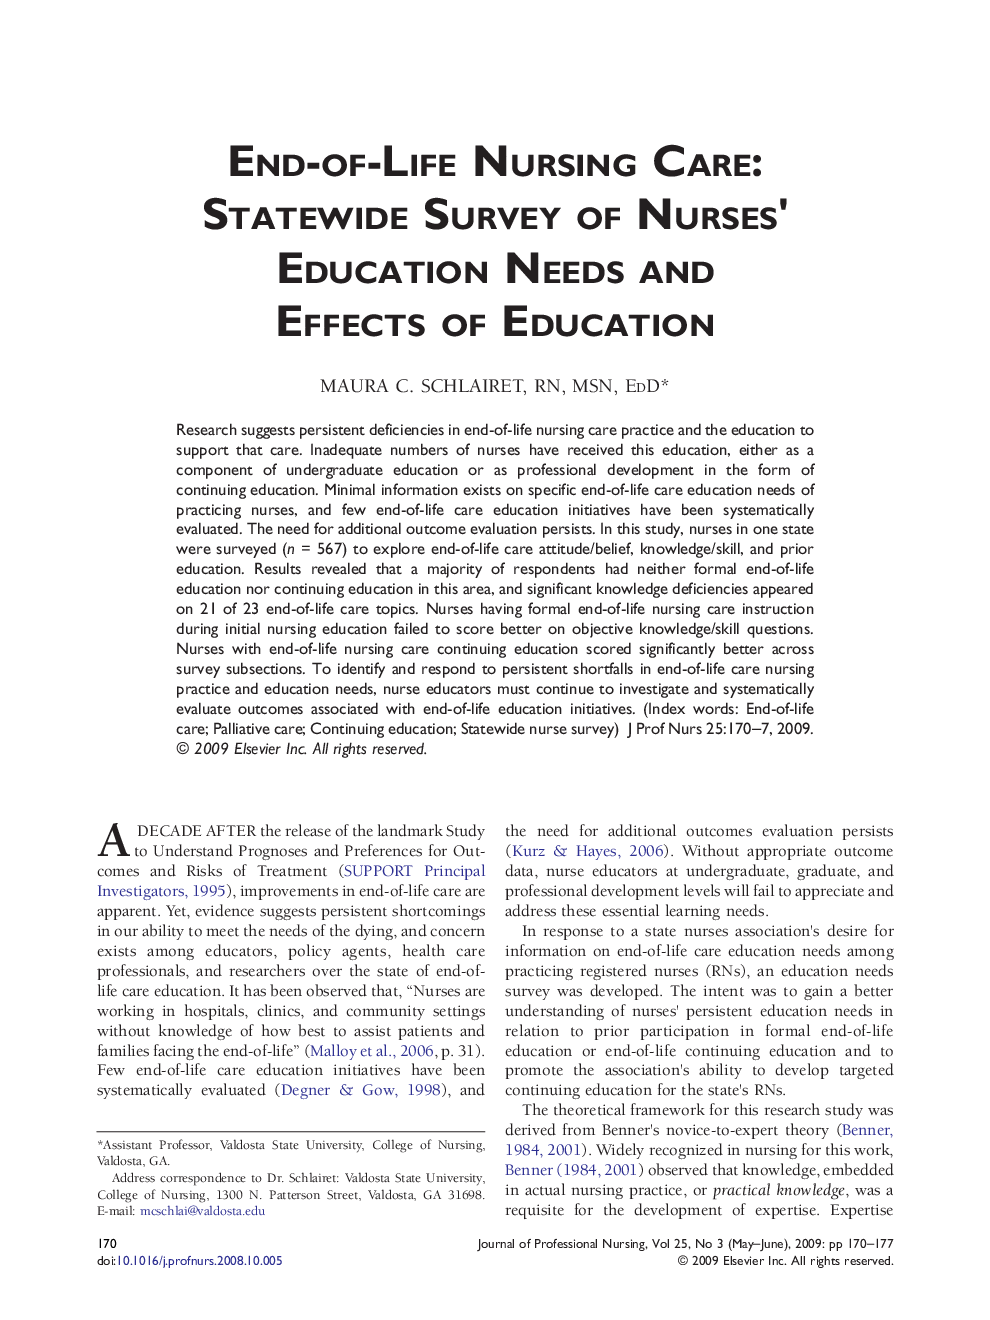 End-of-Life Nursing Care: Statewide Survey of Nurses' Education Needs and Effects of Education